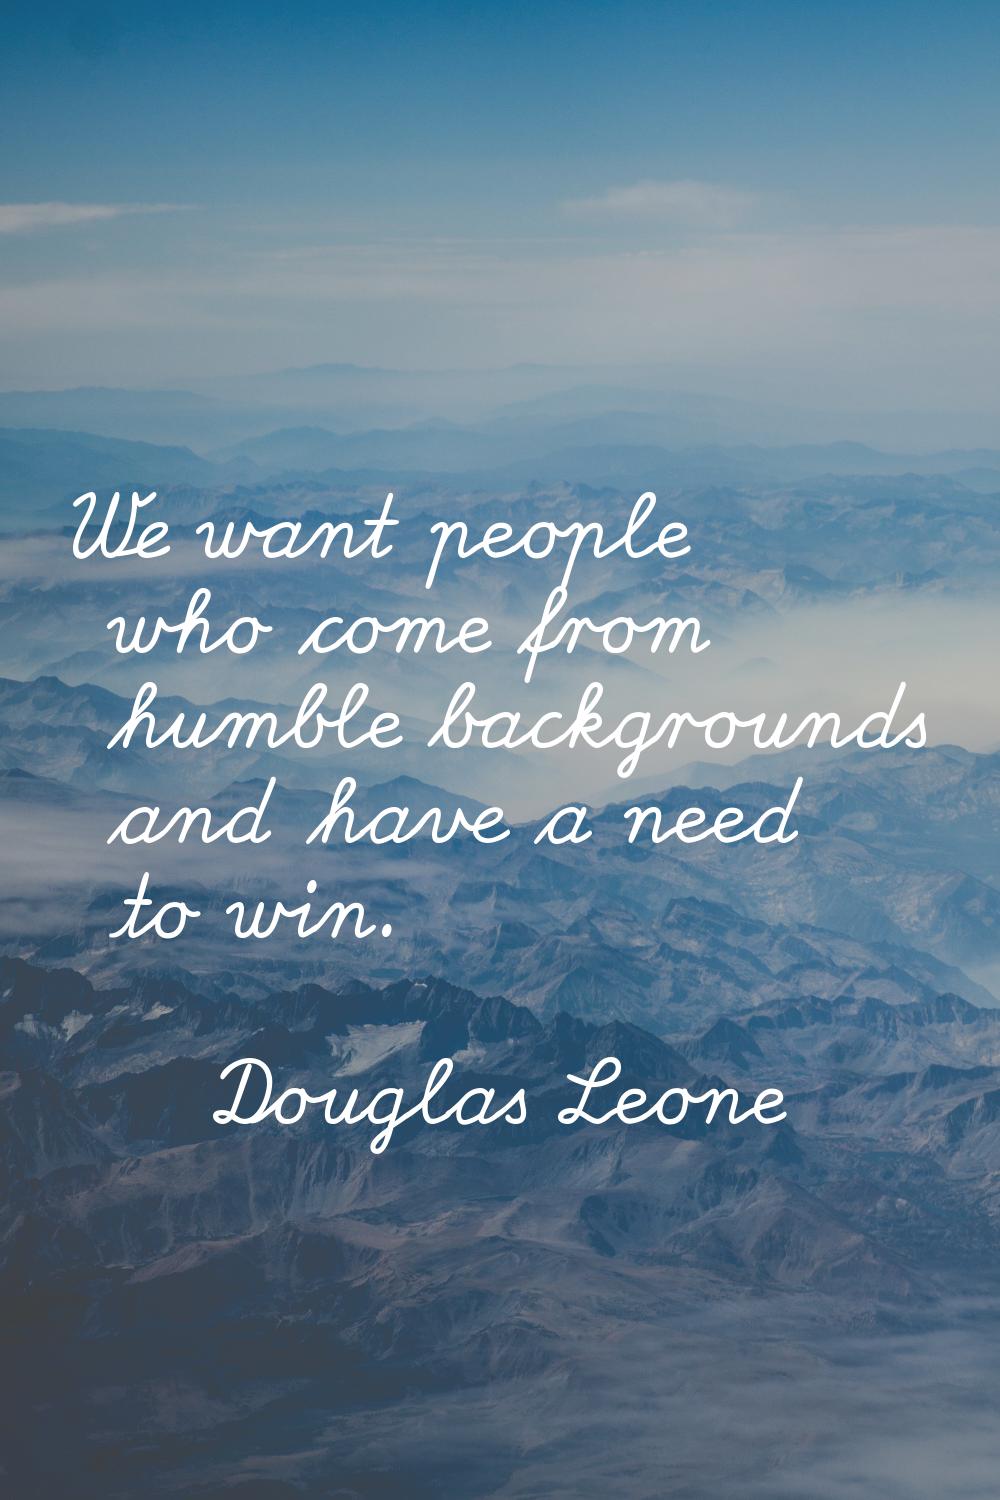 We want people who come from humble backgrounds and have a need to win.